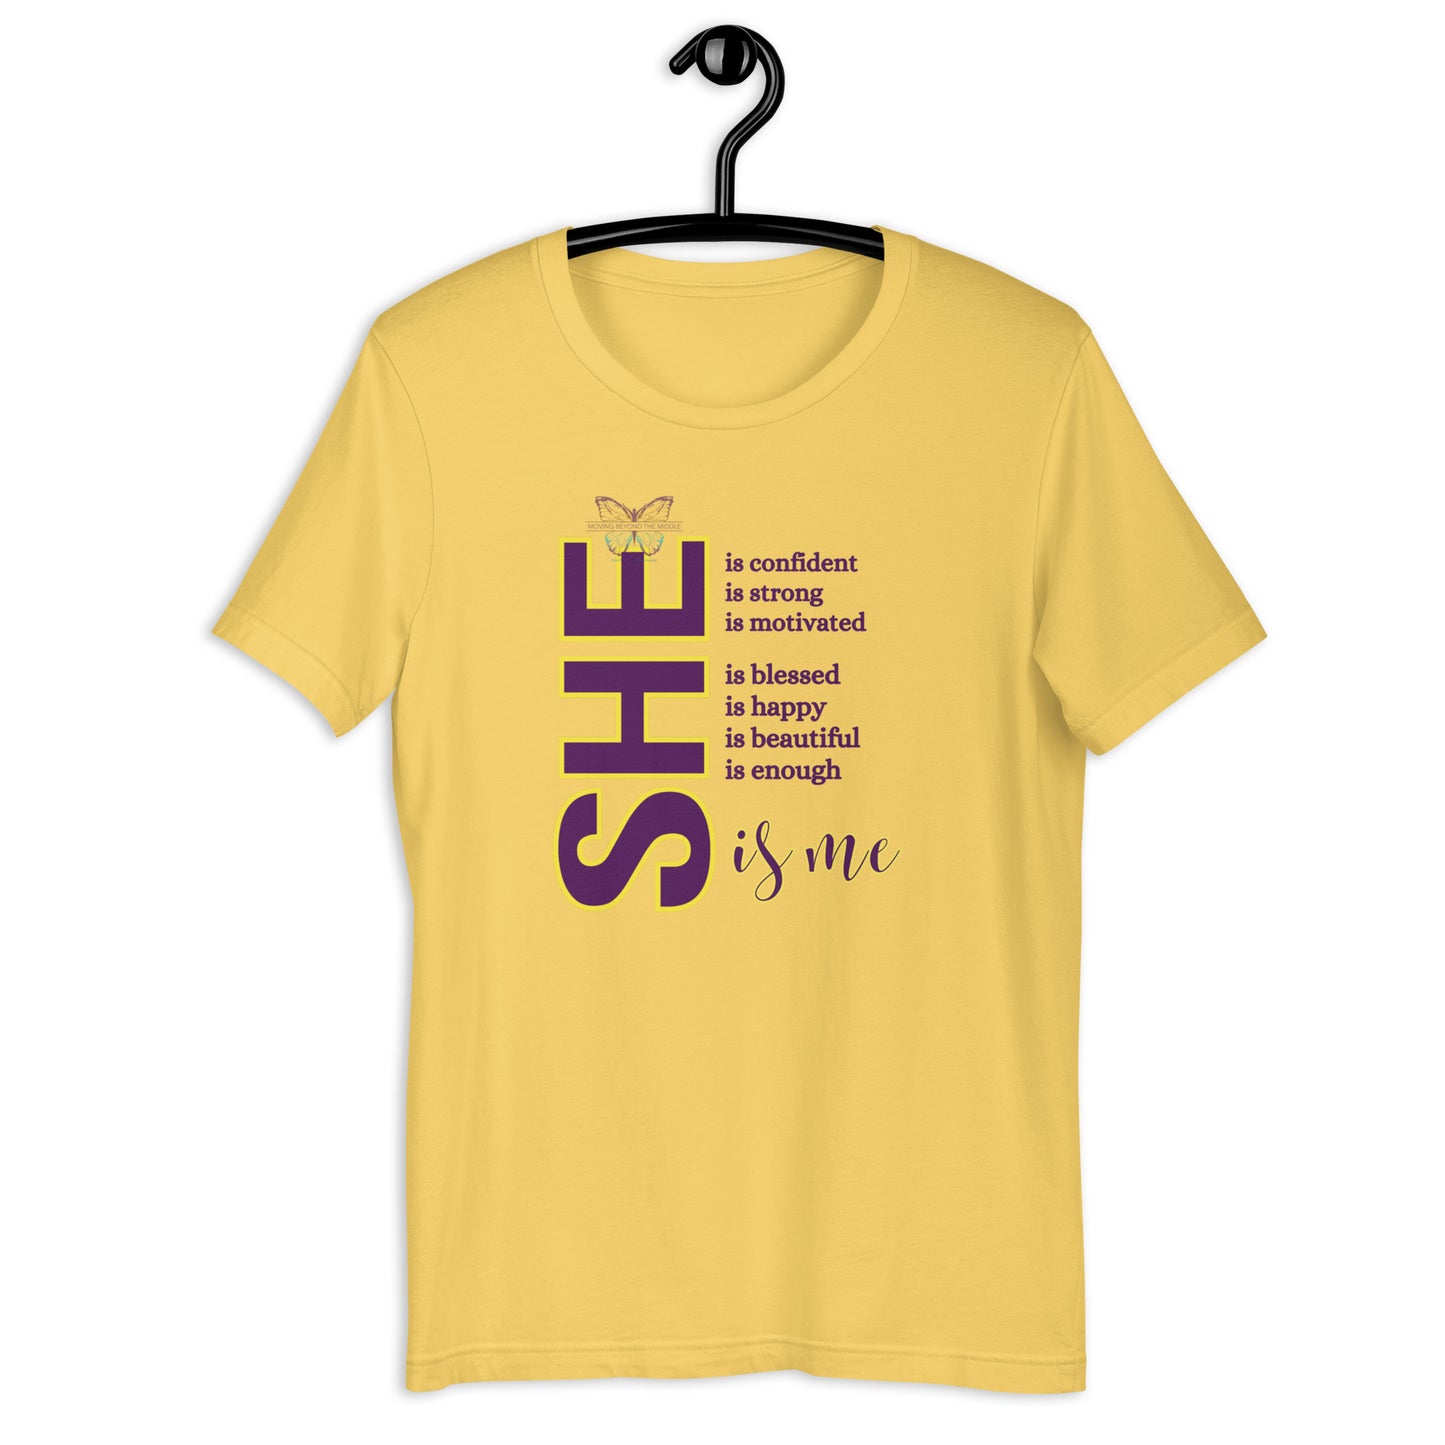 She is" Affirmation Tee (The Moving Beyond The Middle Edition)